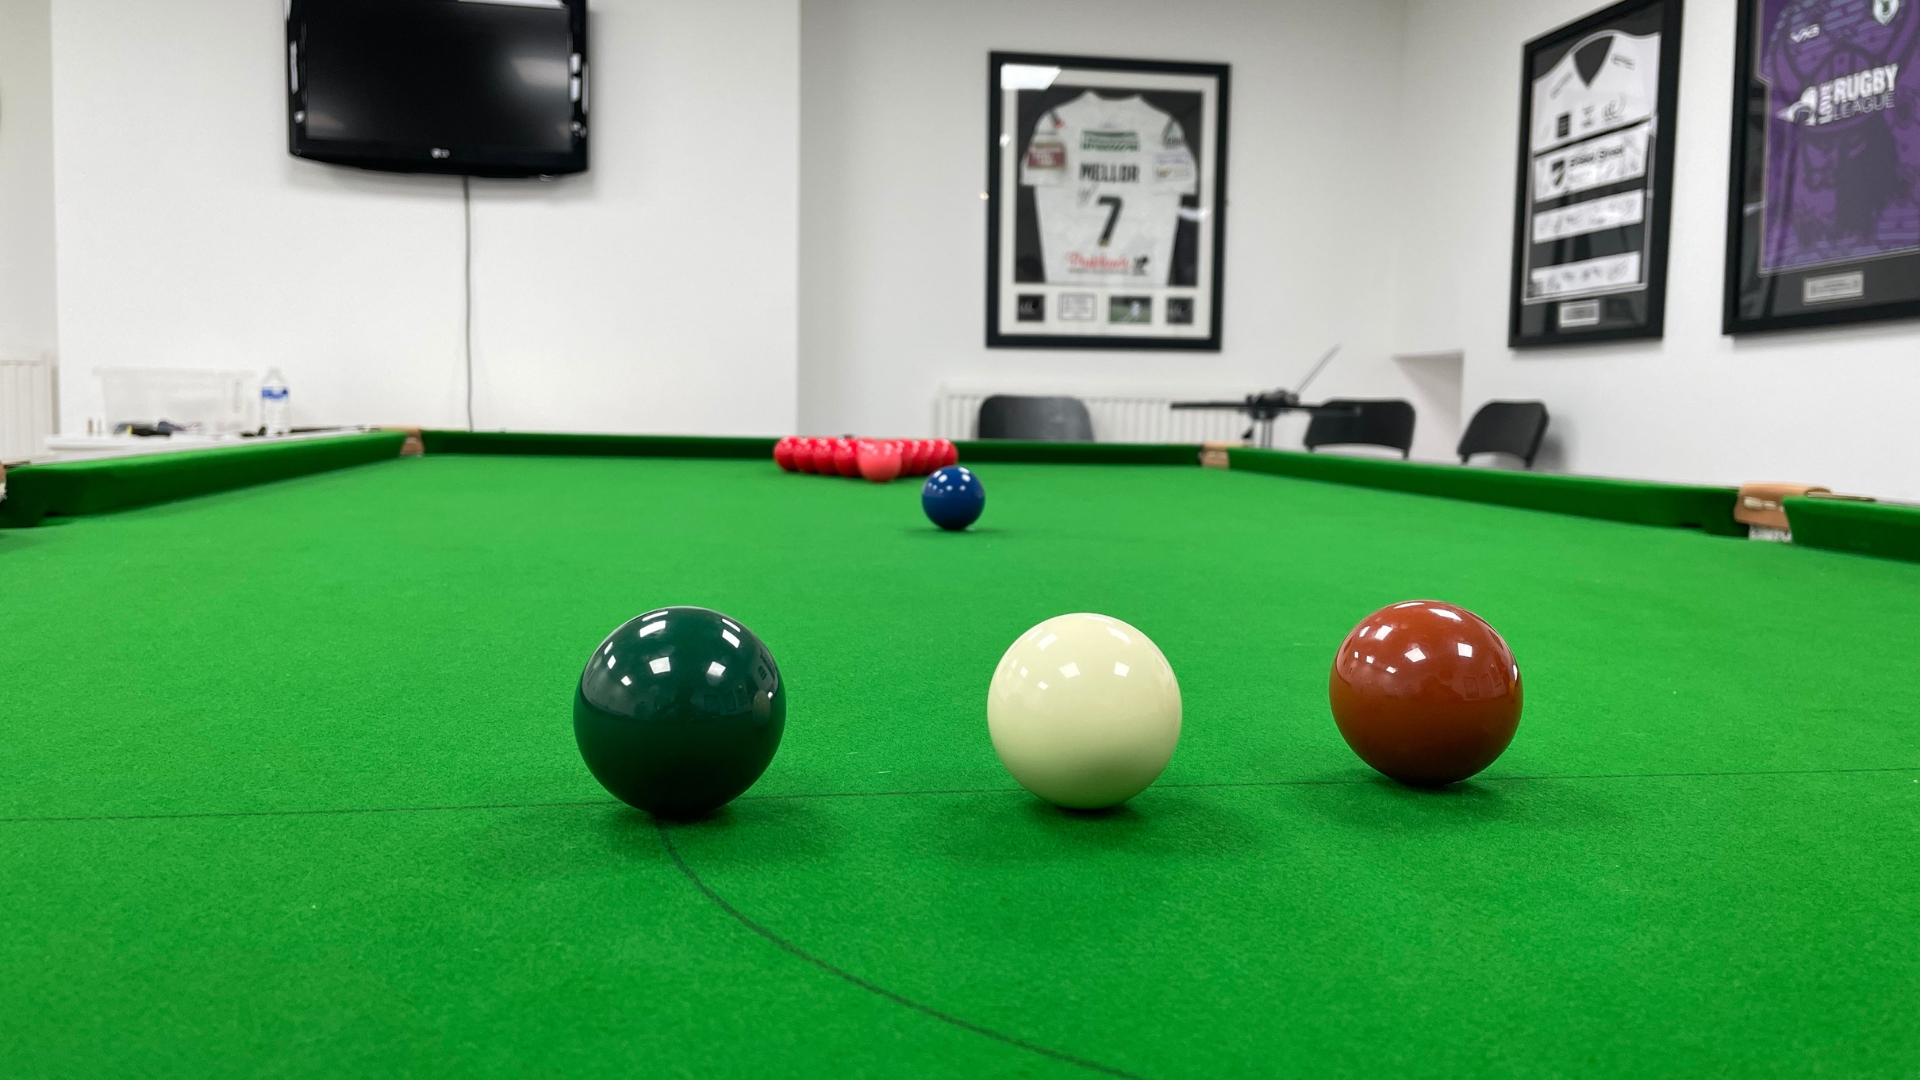 What to focus on when playing snooker